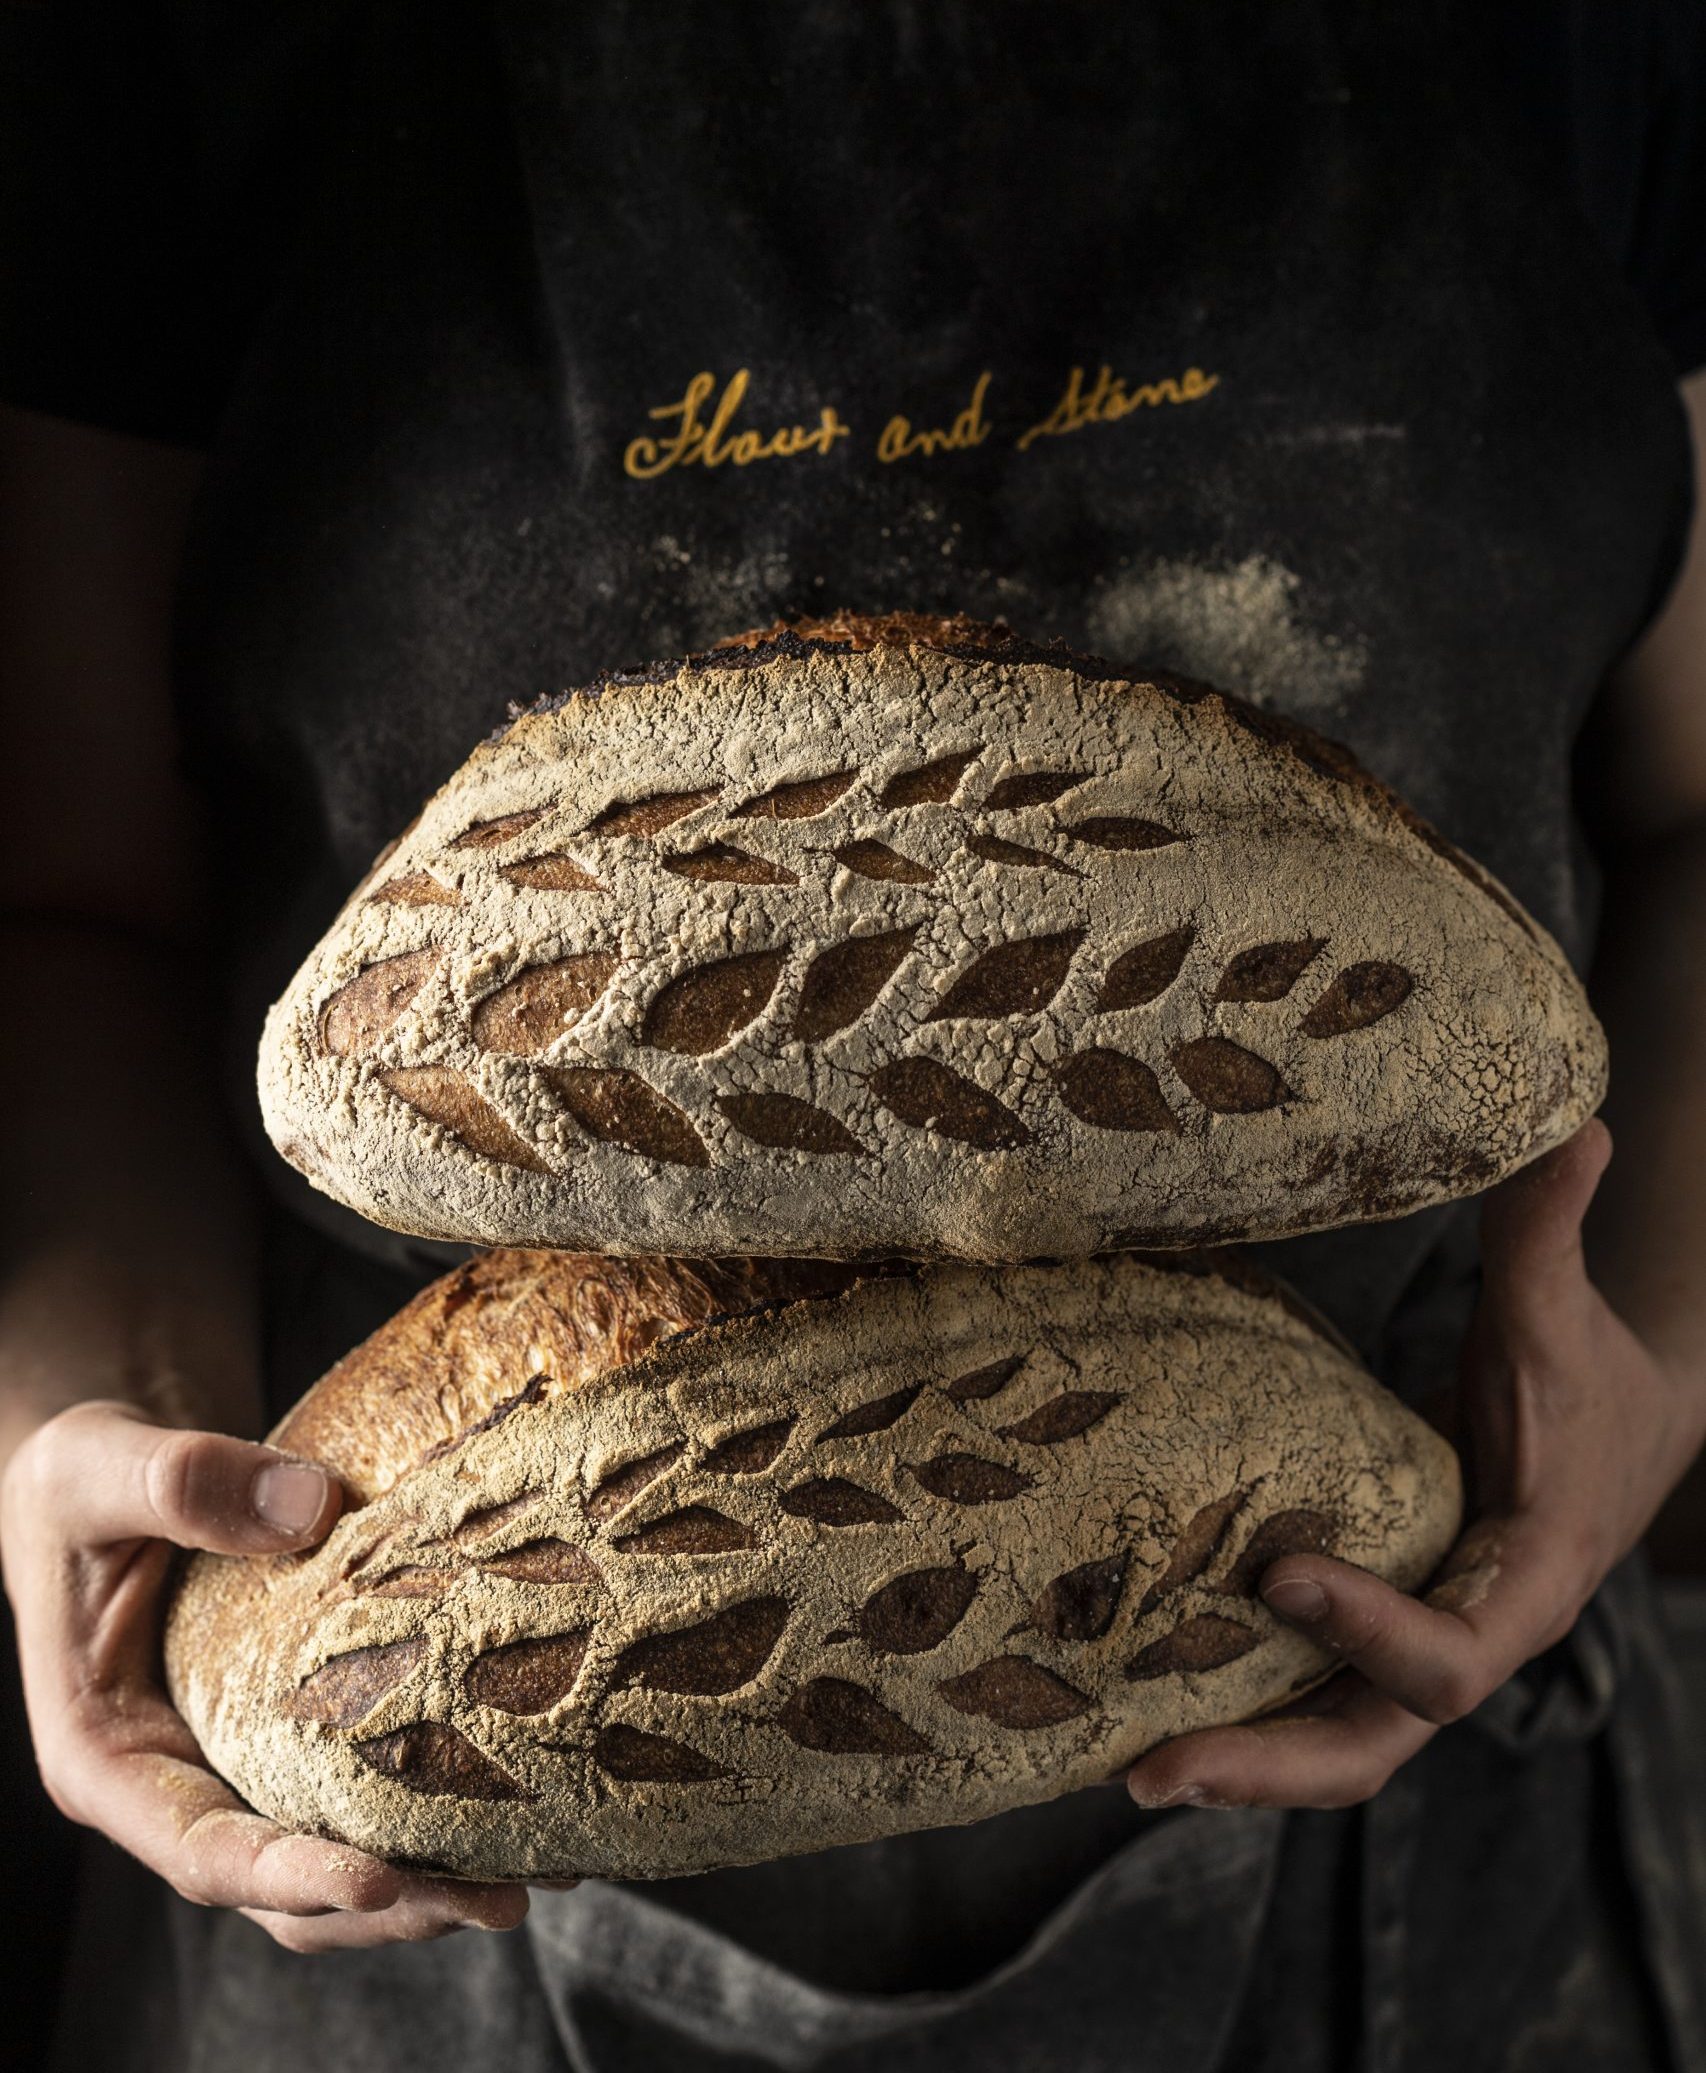 Wholemeal sourdough: Hearty, tangy bread with wholesome flavor